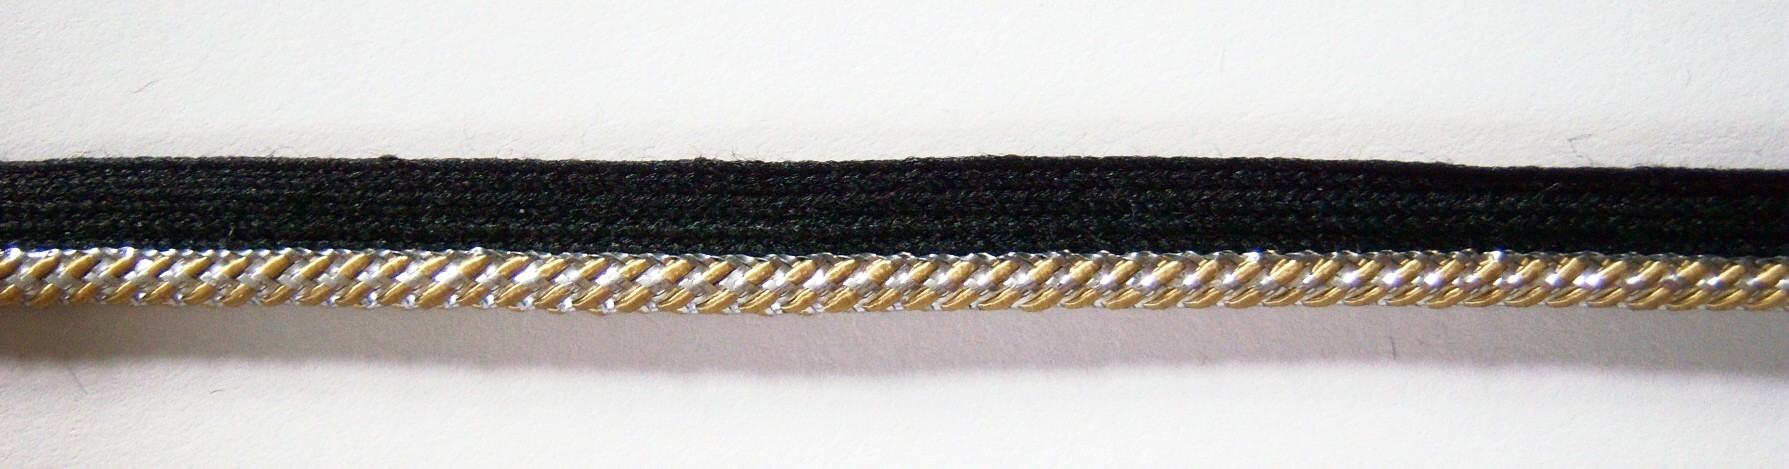 Black/Silver/Gold 3/16" Piping